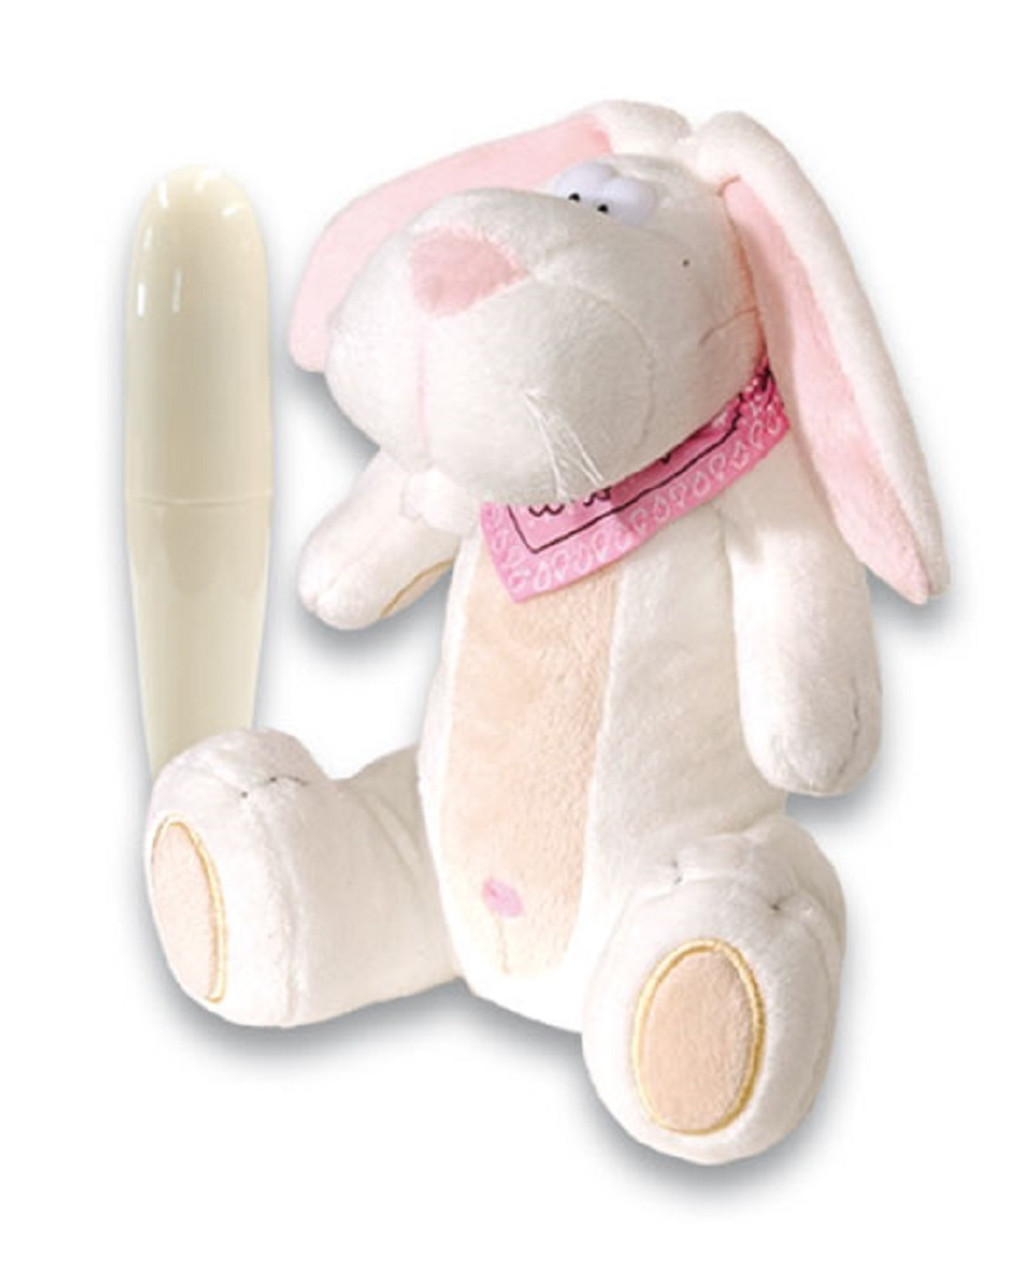 Hide A Vibe Rabbit Stuffed Animal Discreet Novelty Sex Toy Keep Hidden Vibrator picture pic